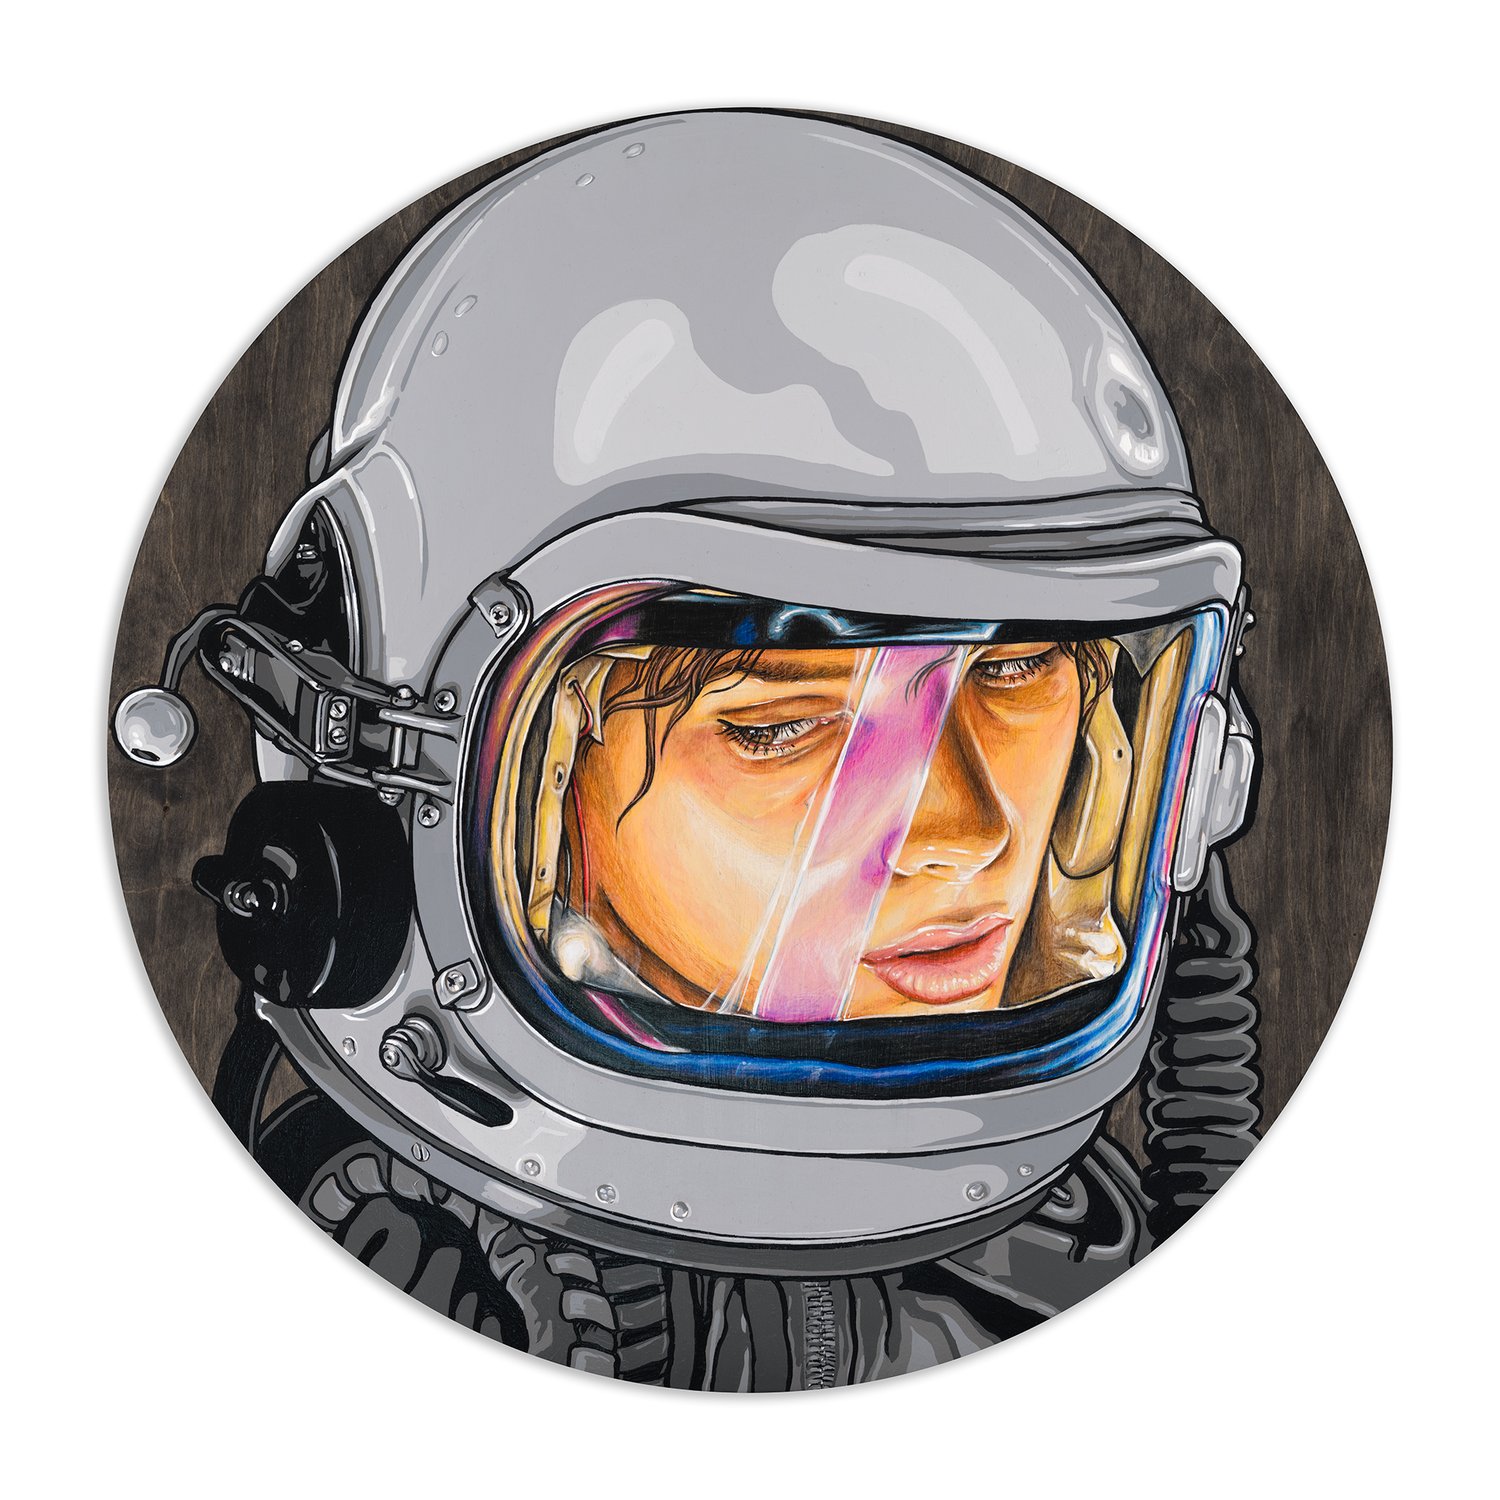 It's Lonely Out in Space by Ella Nilsson - Fine Art Print